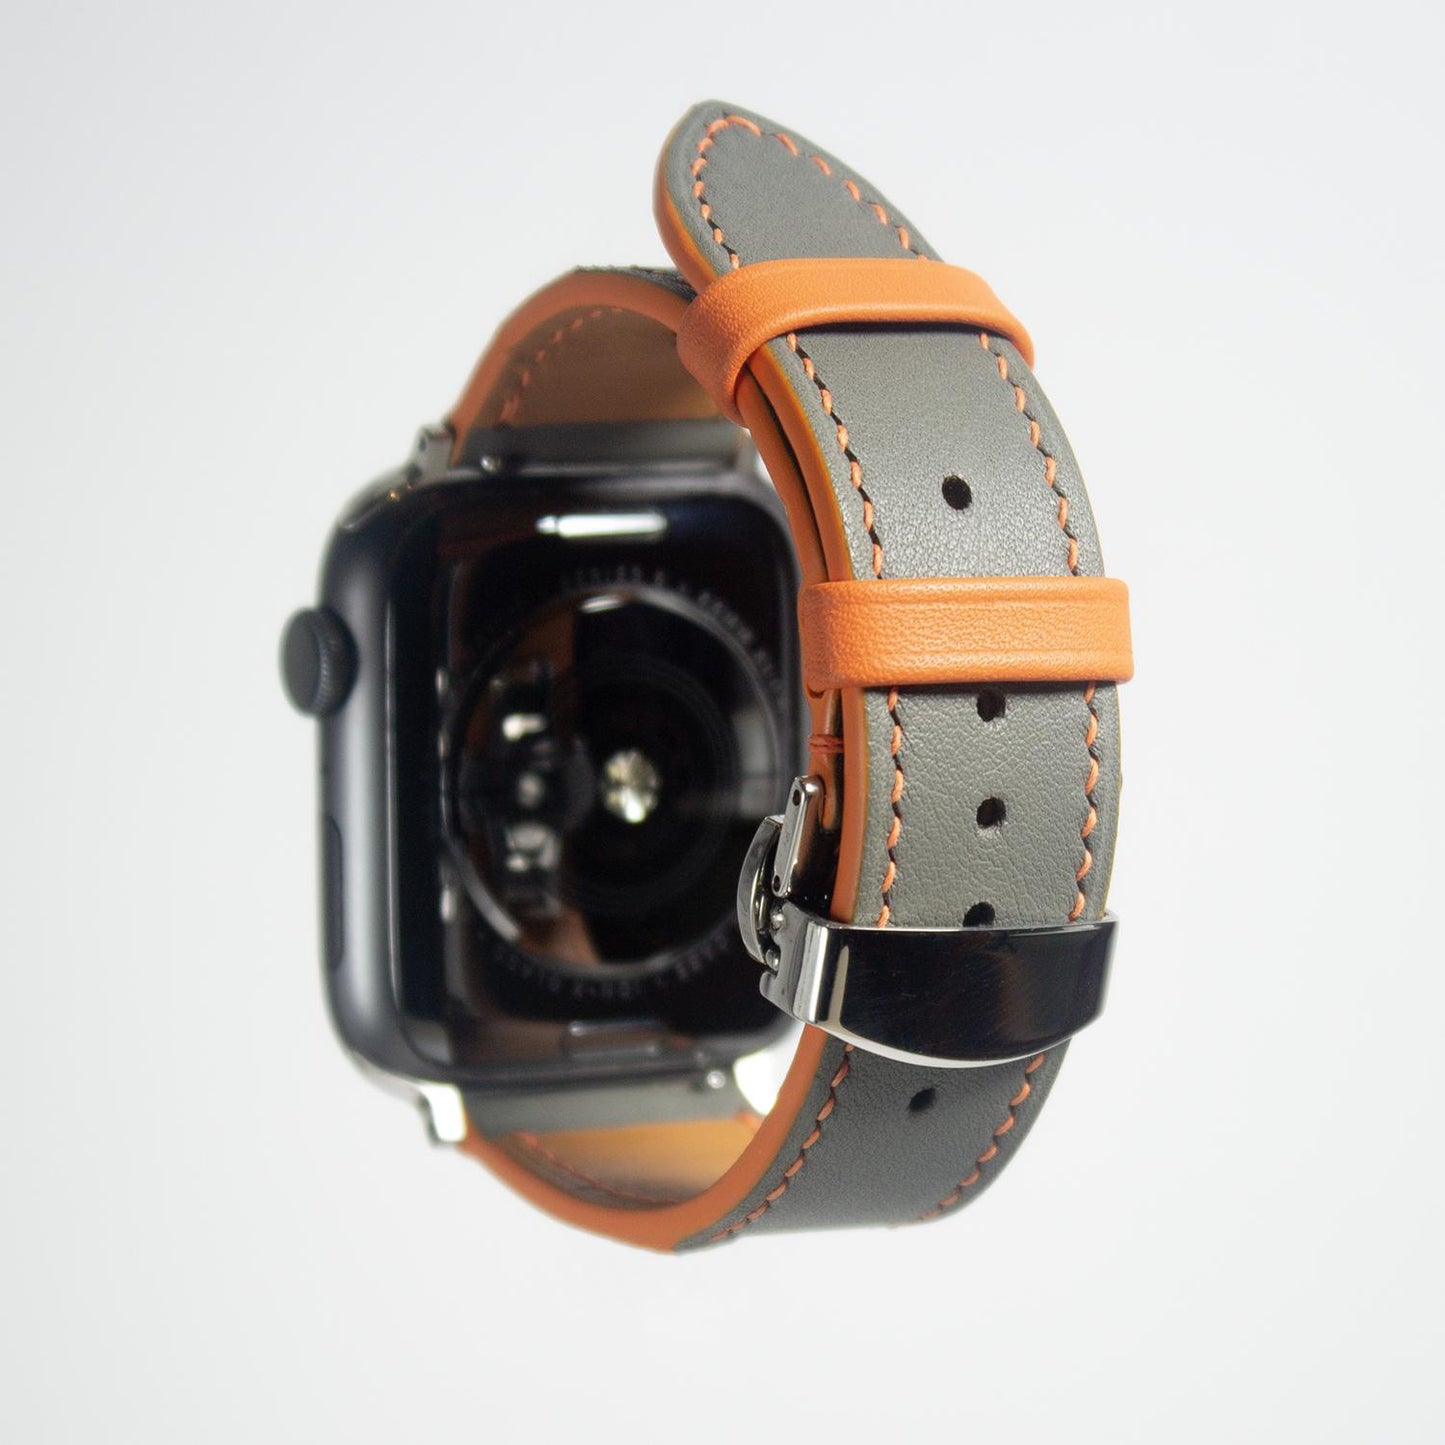 Apple watch bands in gray Swift leather with orange stitching, combining style with a pop of color.